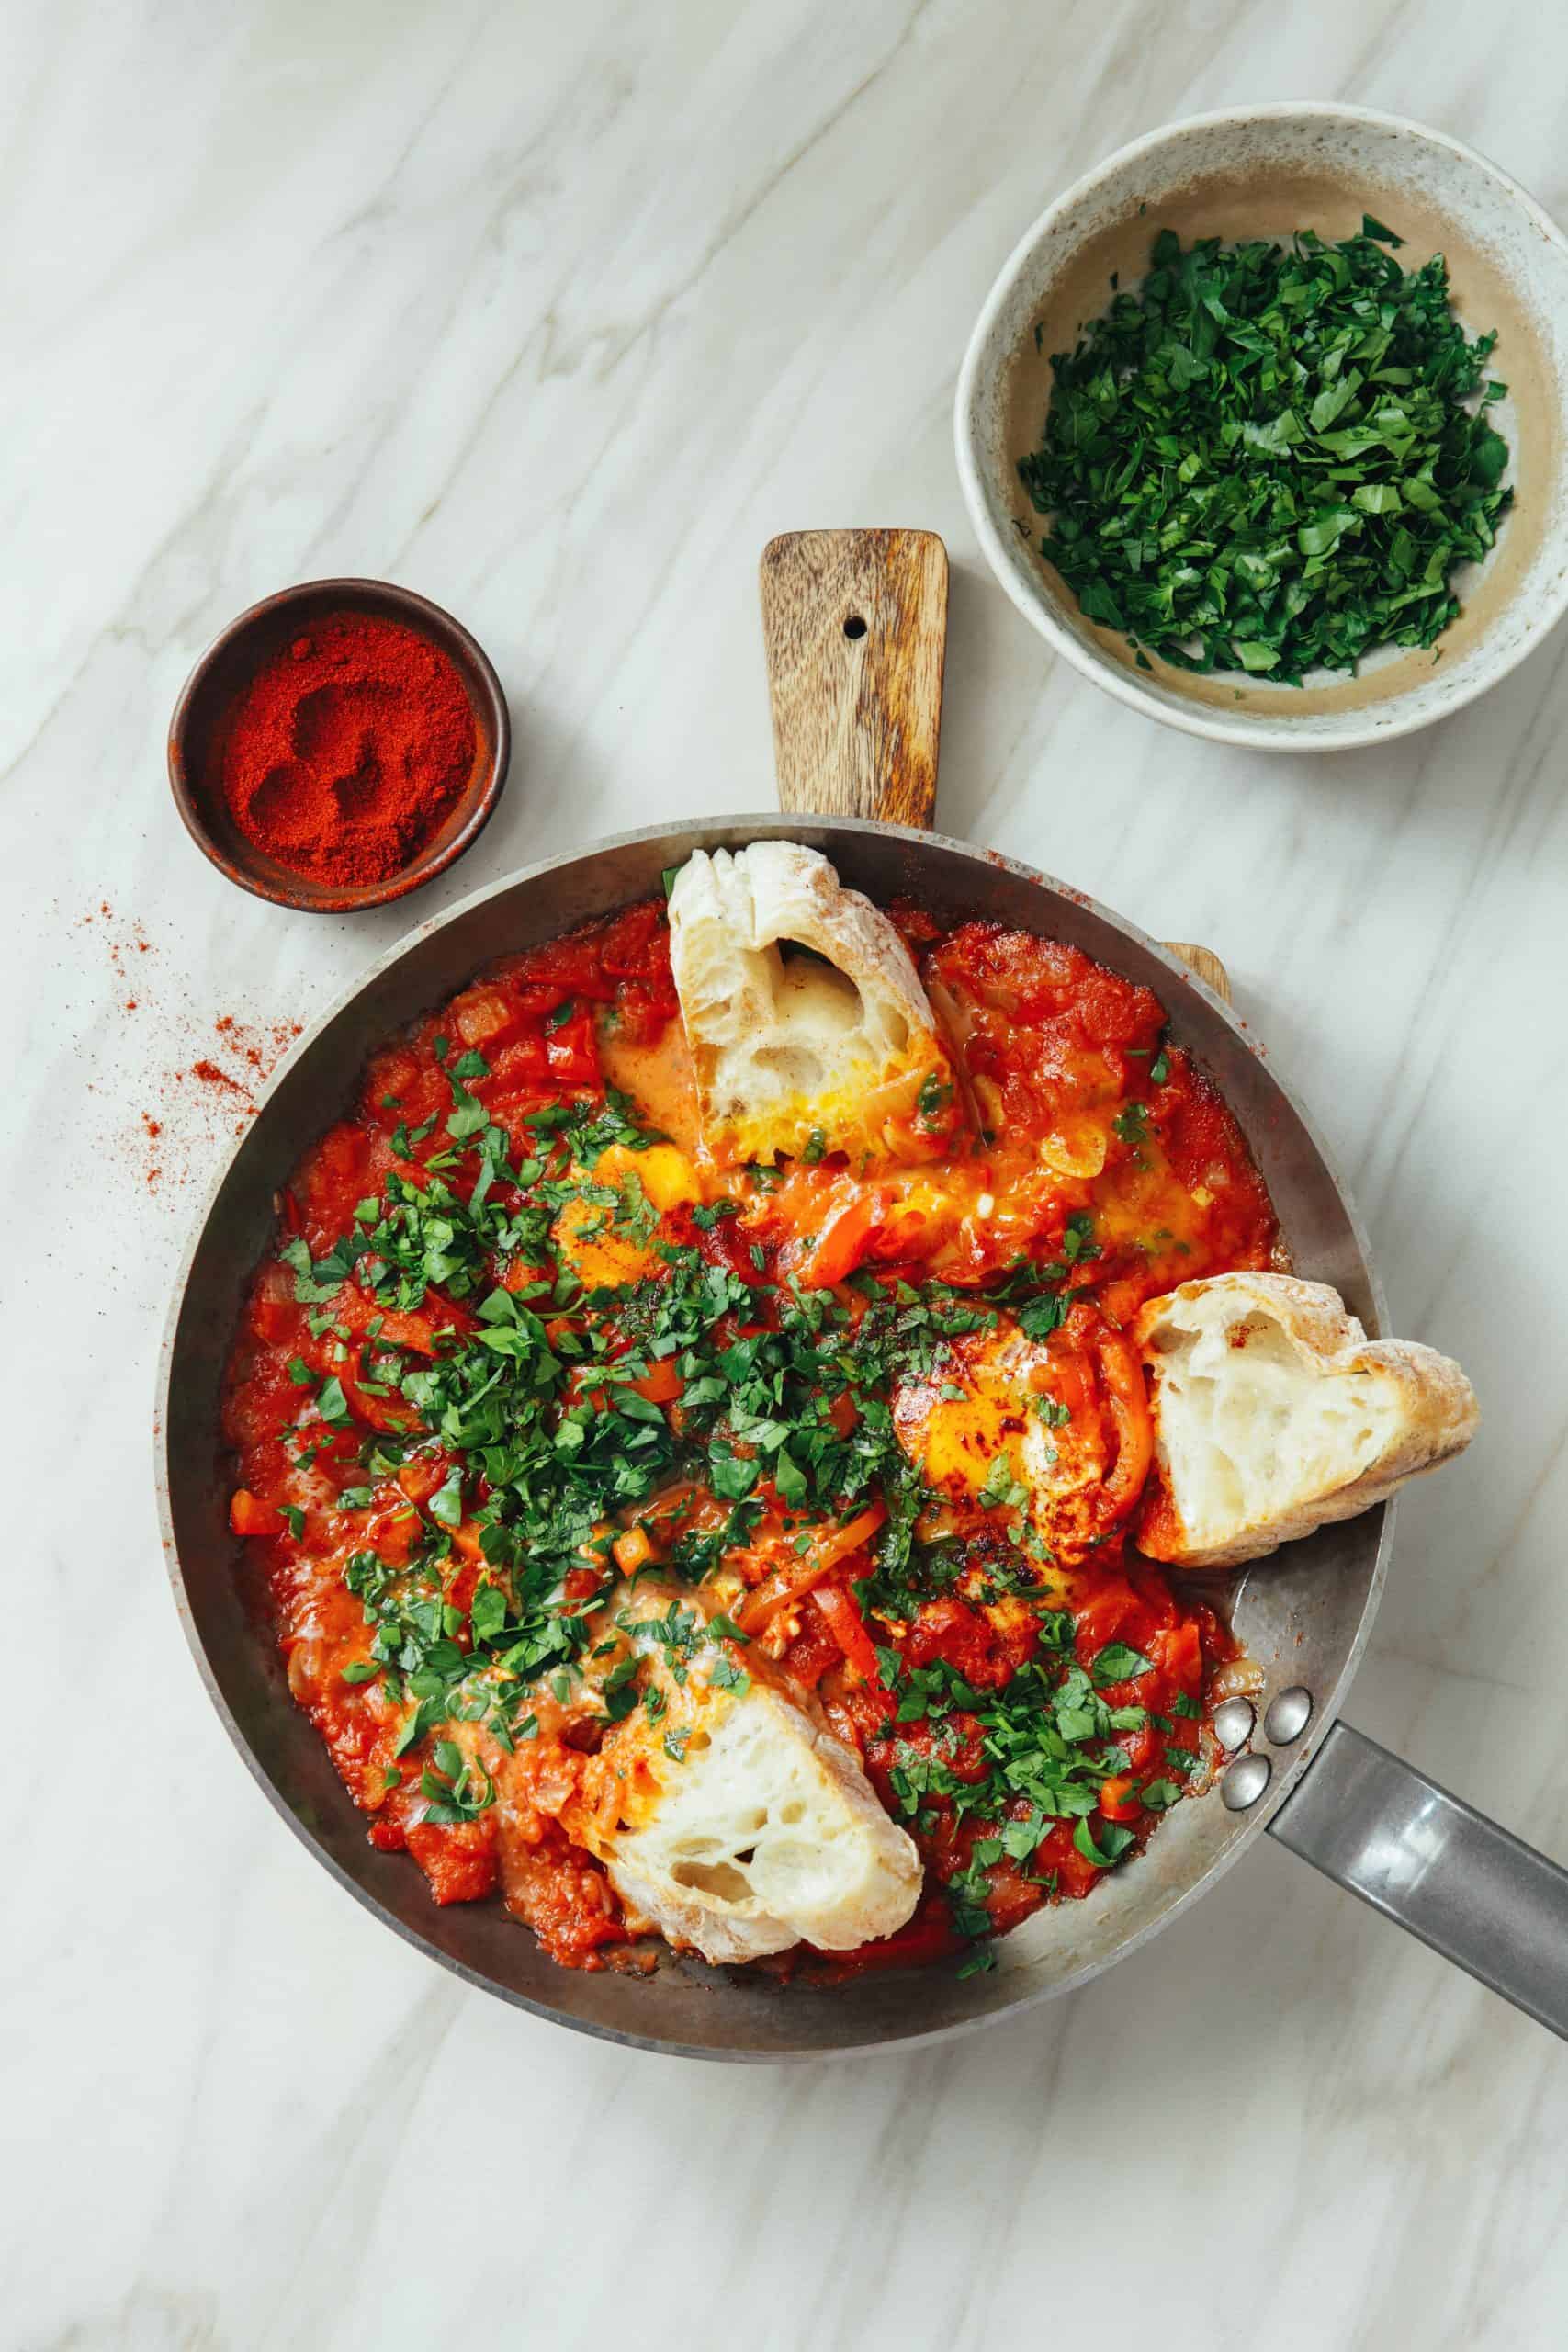 Spicy shakshuka with sourdough toast